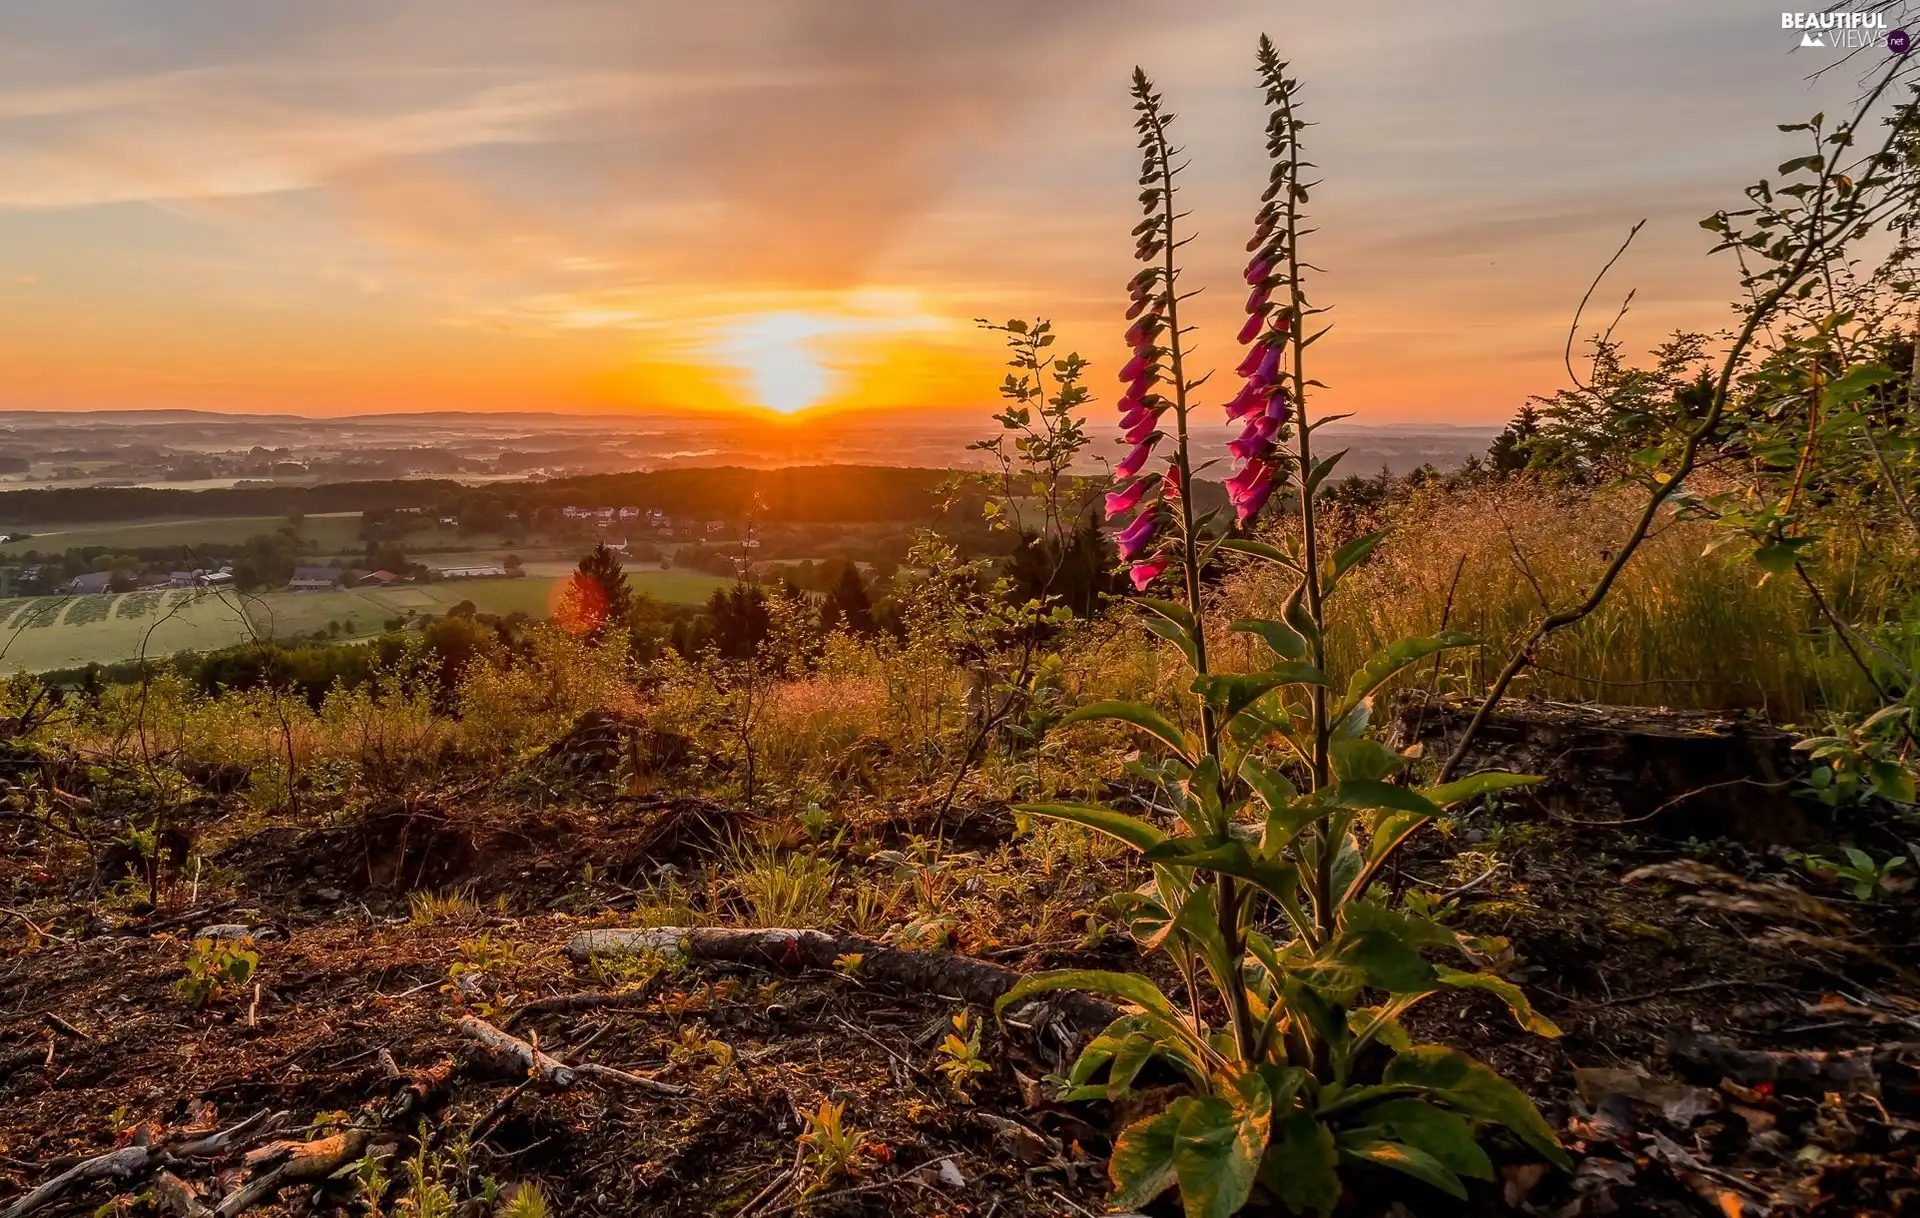 Purple Foxglove, Landscape Park Teutoburg Forest, Valley, Flowers, Germany, Great Sunsets, country